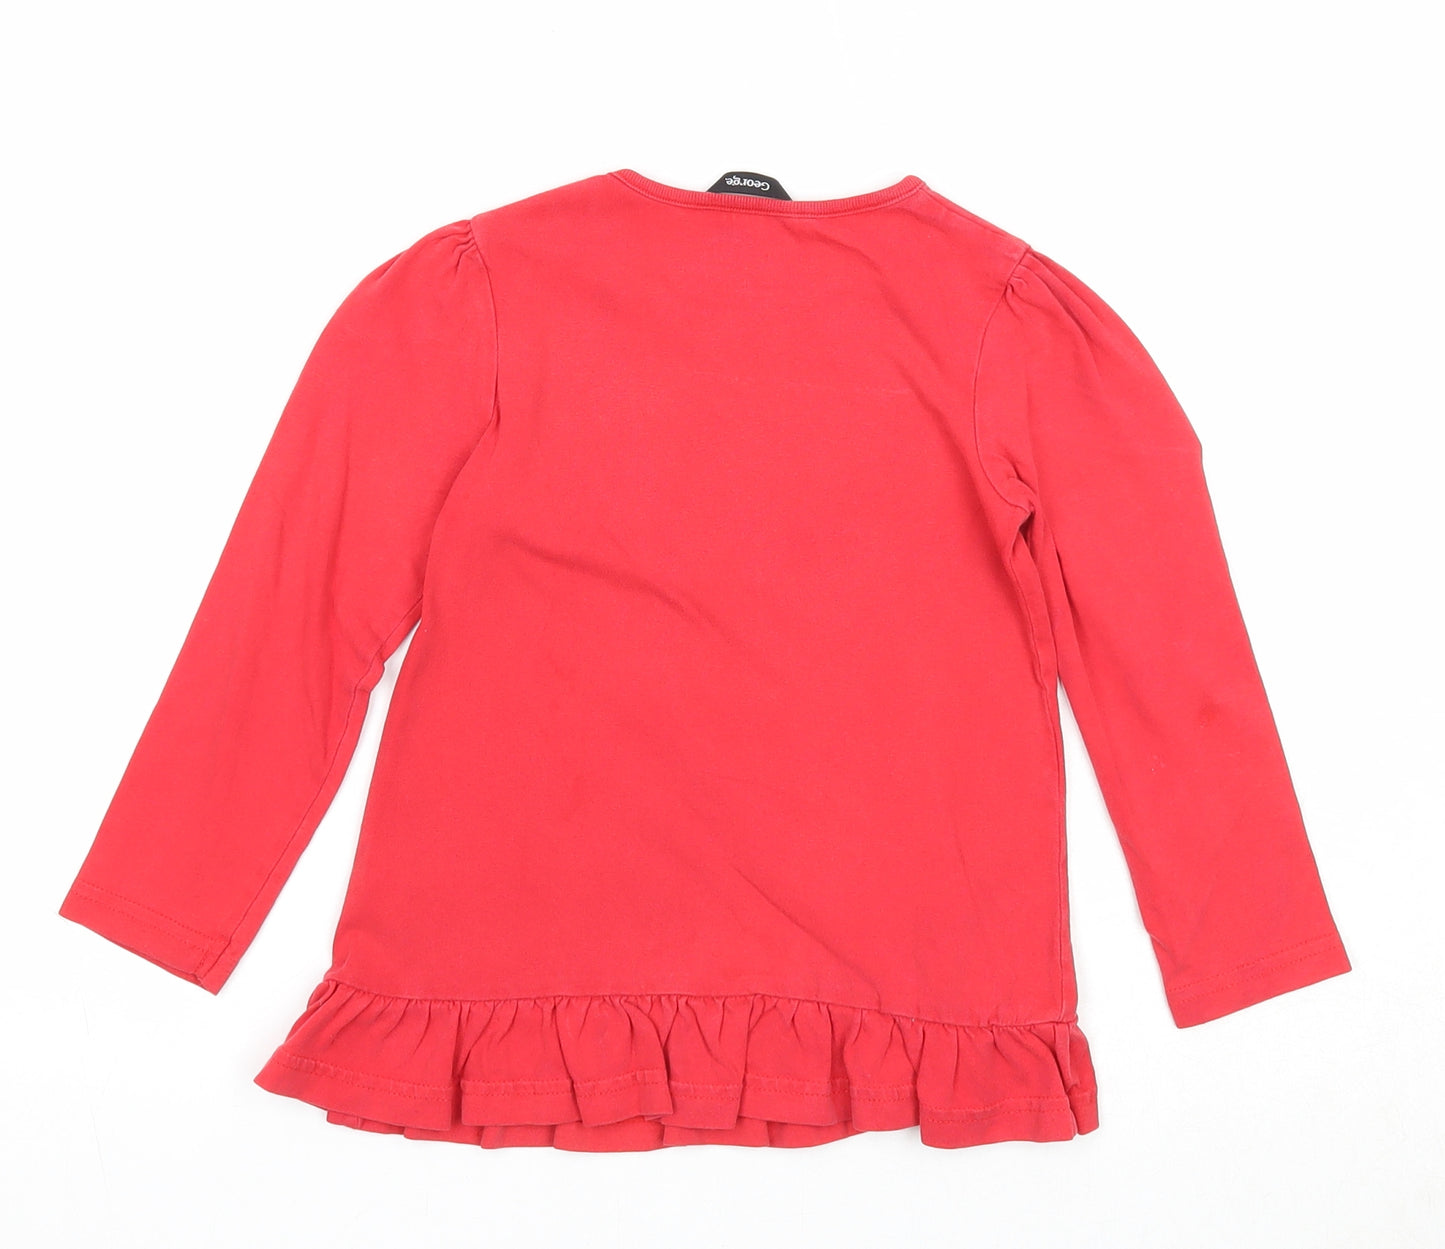 George Girls Red Cotton Basic T-Shirt Size 3-4 Years Round Neck Pullover - My Grandma Loves Me!